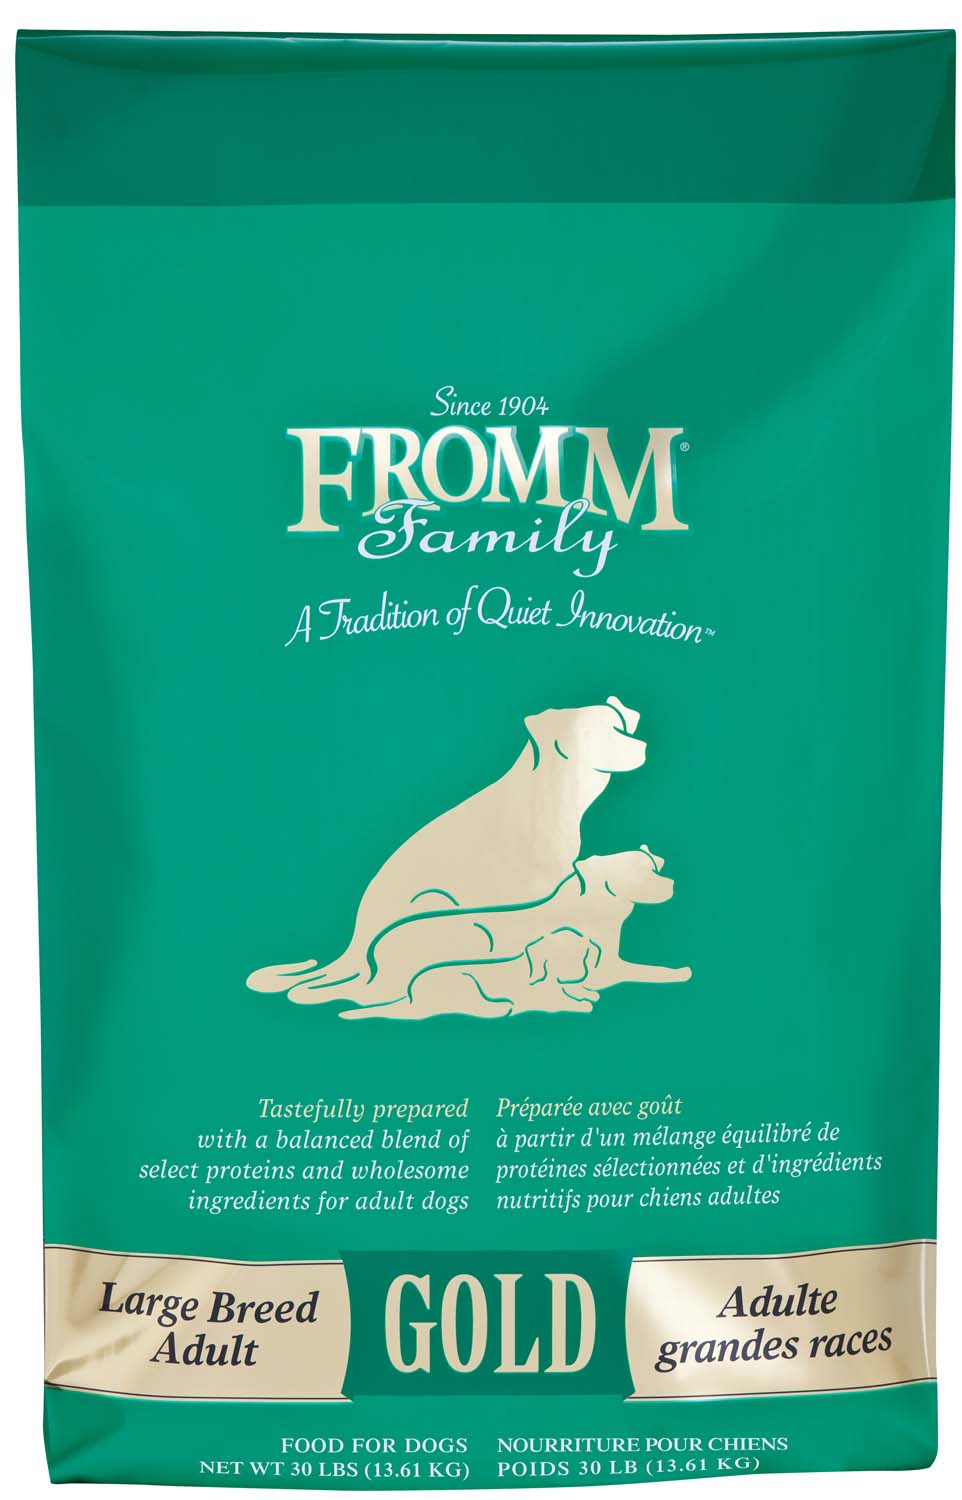 Fromm Family Large Breed Adult Gold Food for Dogs, 30 lbs